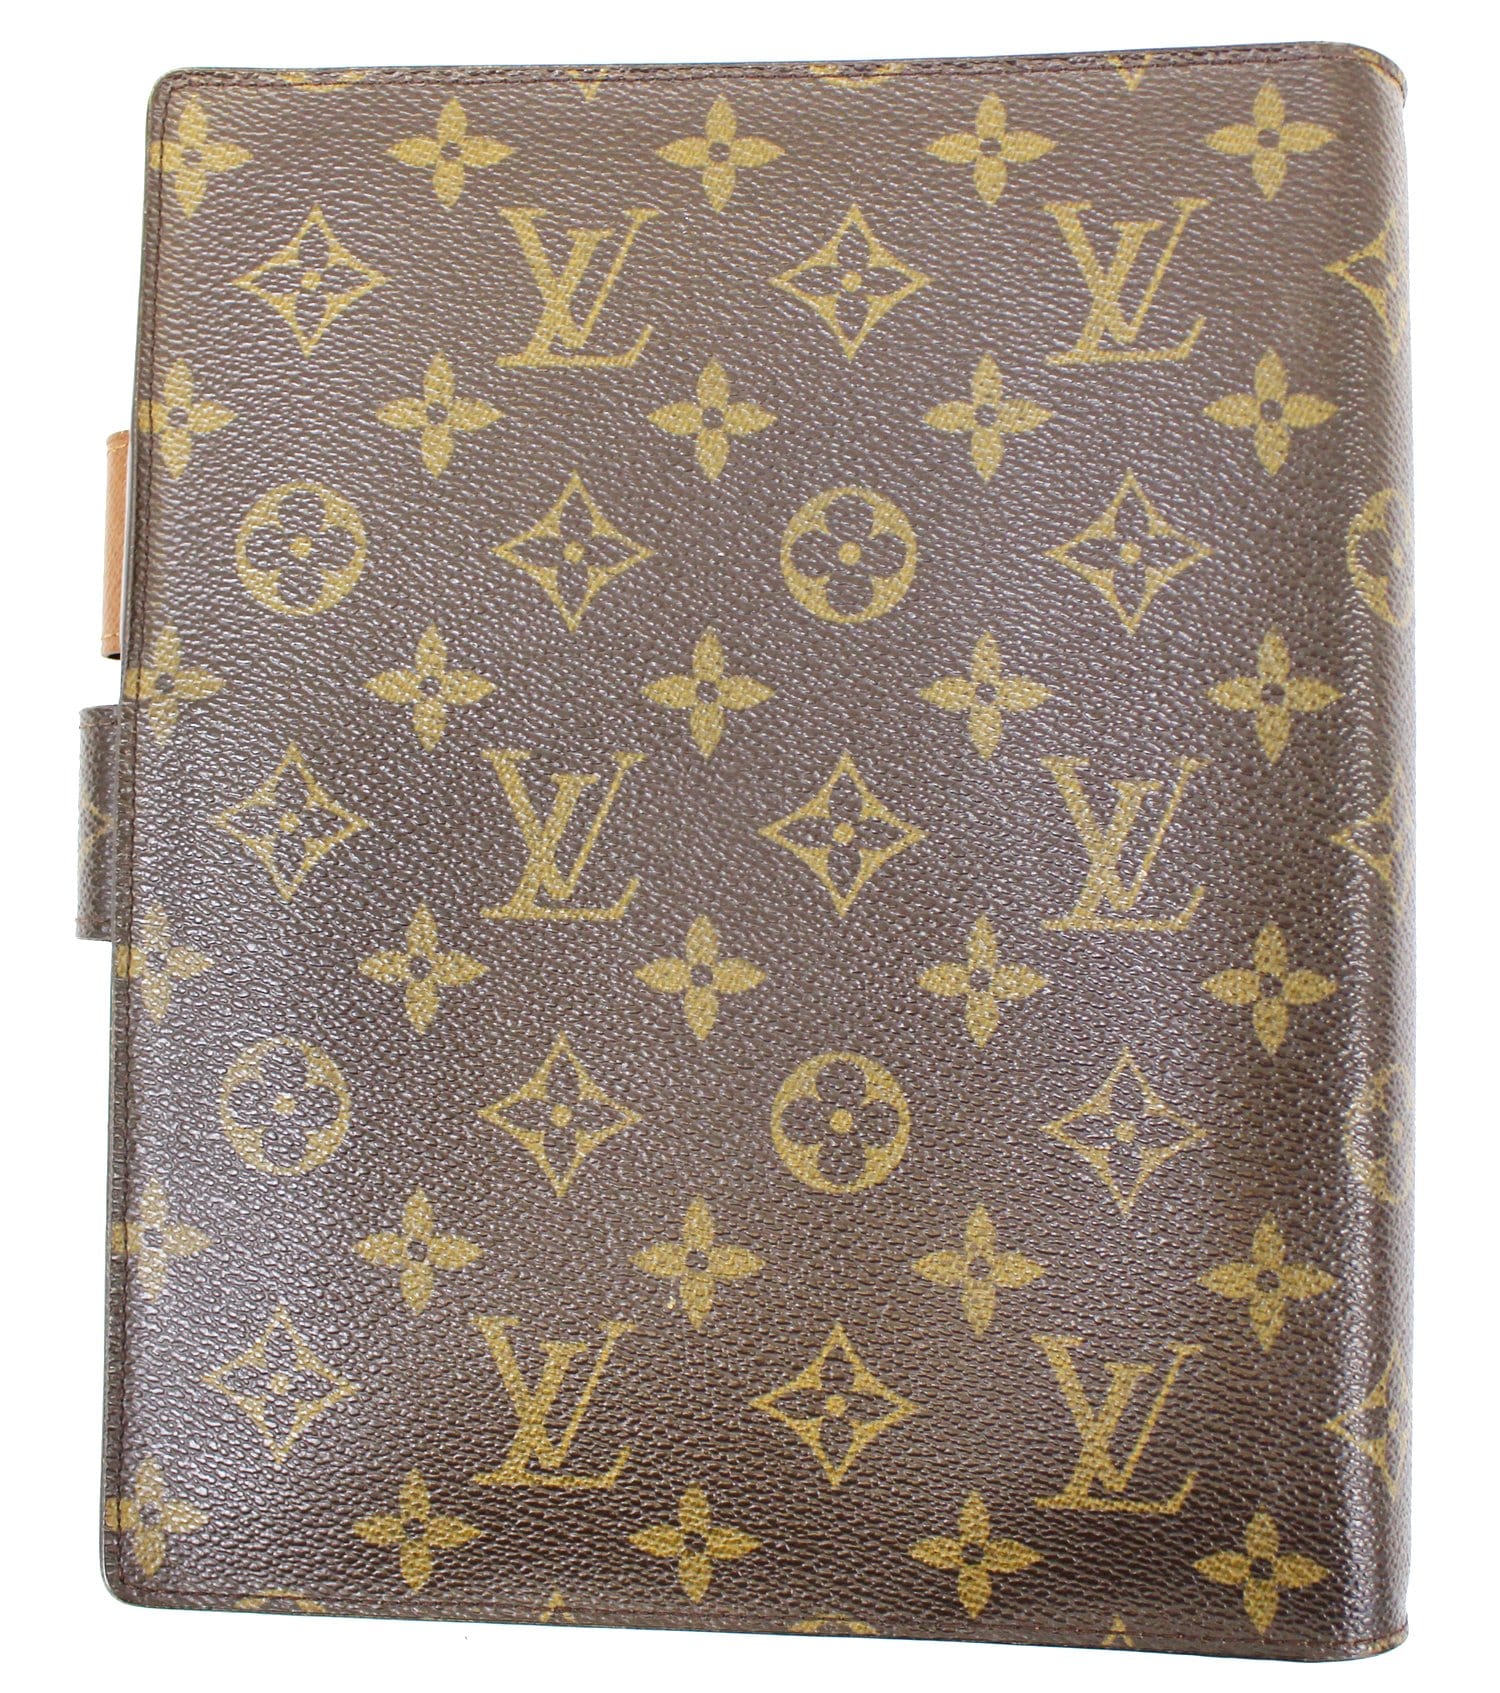 LOUIS VUITTON Nomad Agenda GM Day Planner Cover Beige R20473 LV used